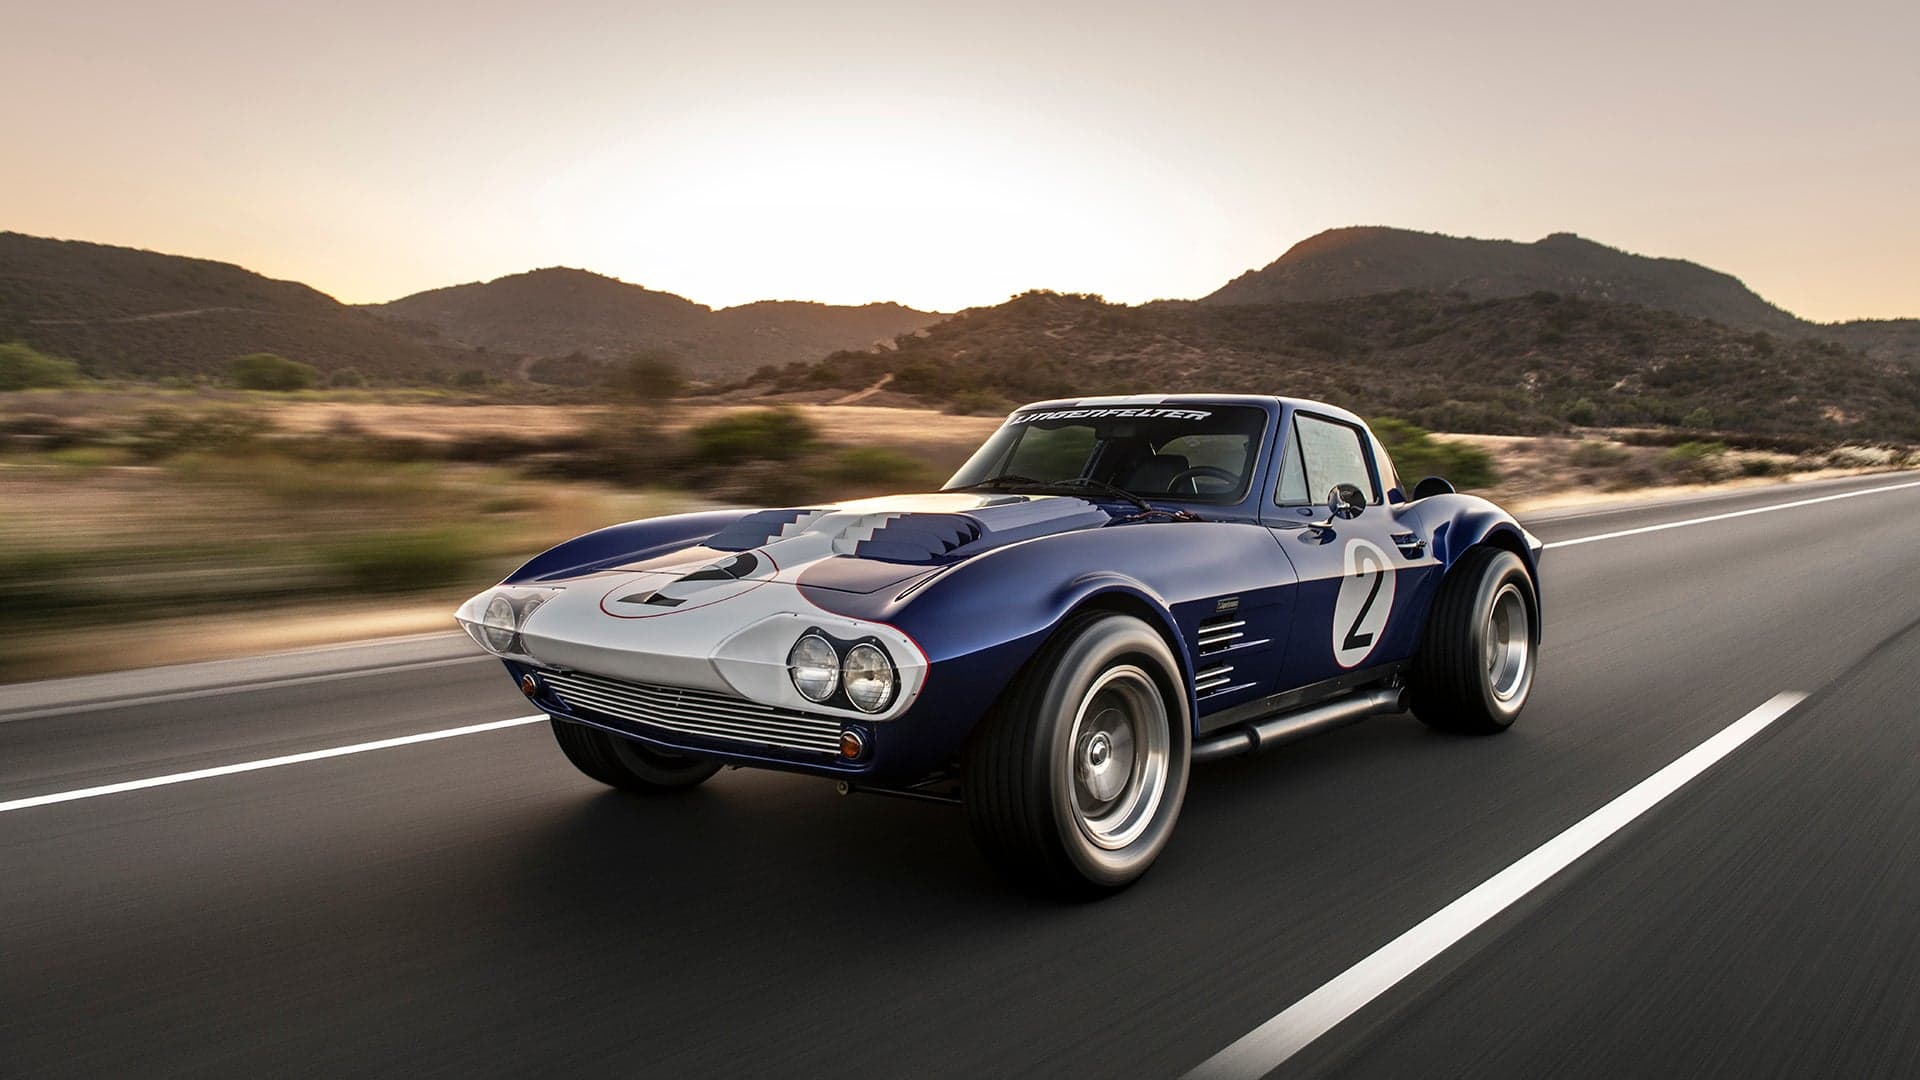 The Top 5 Chevrolet Corvettes That Aren’t Mid-Engined